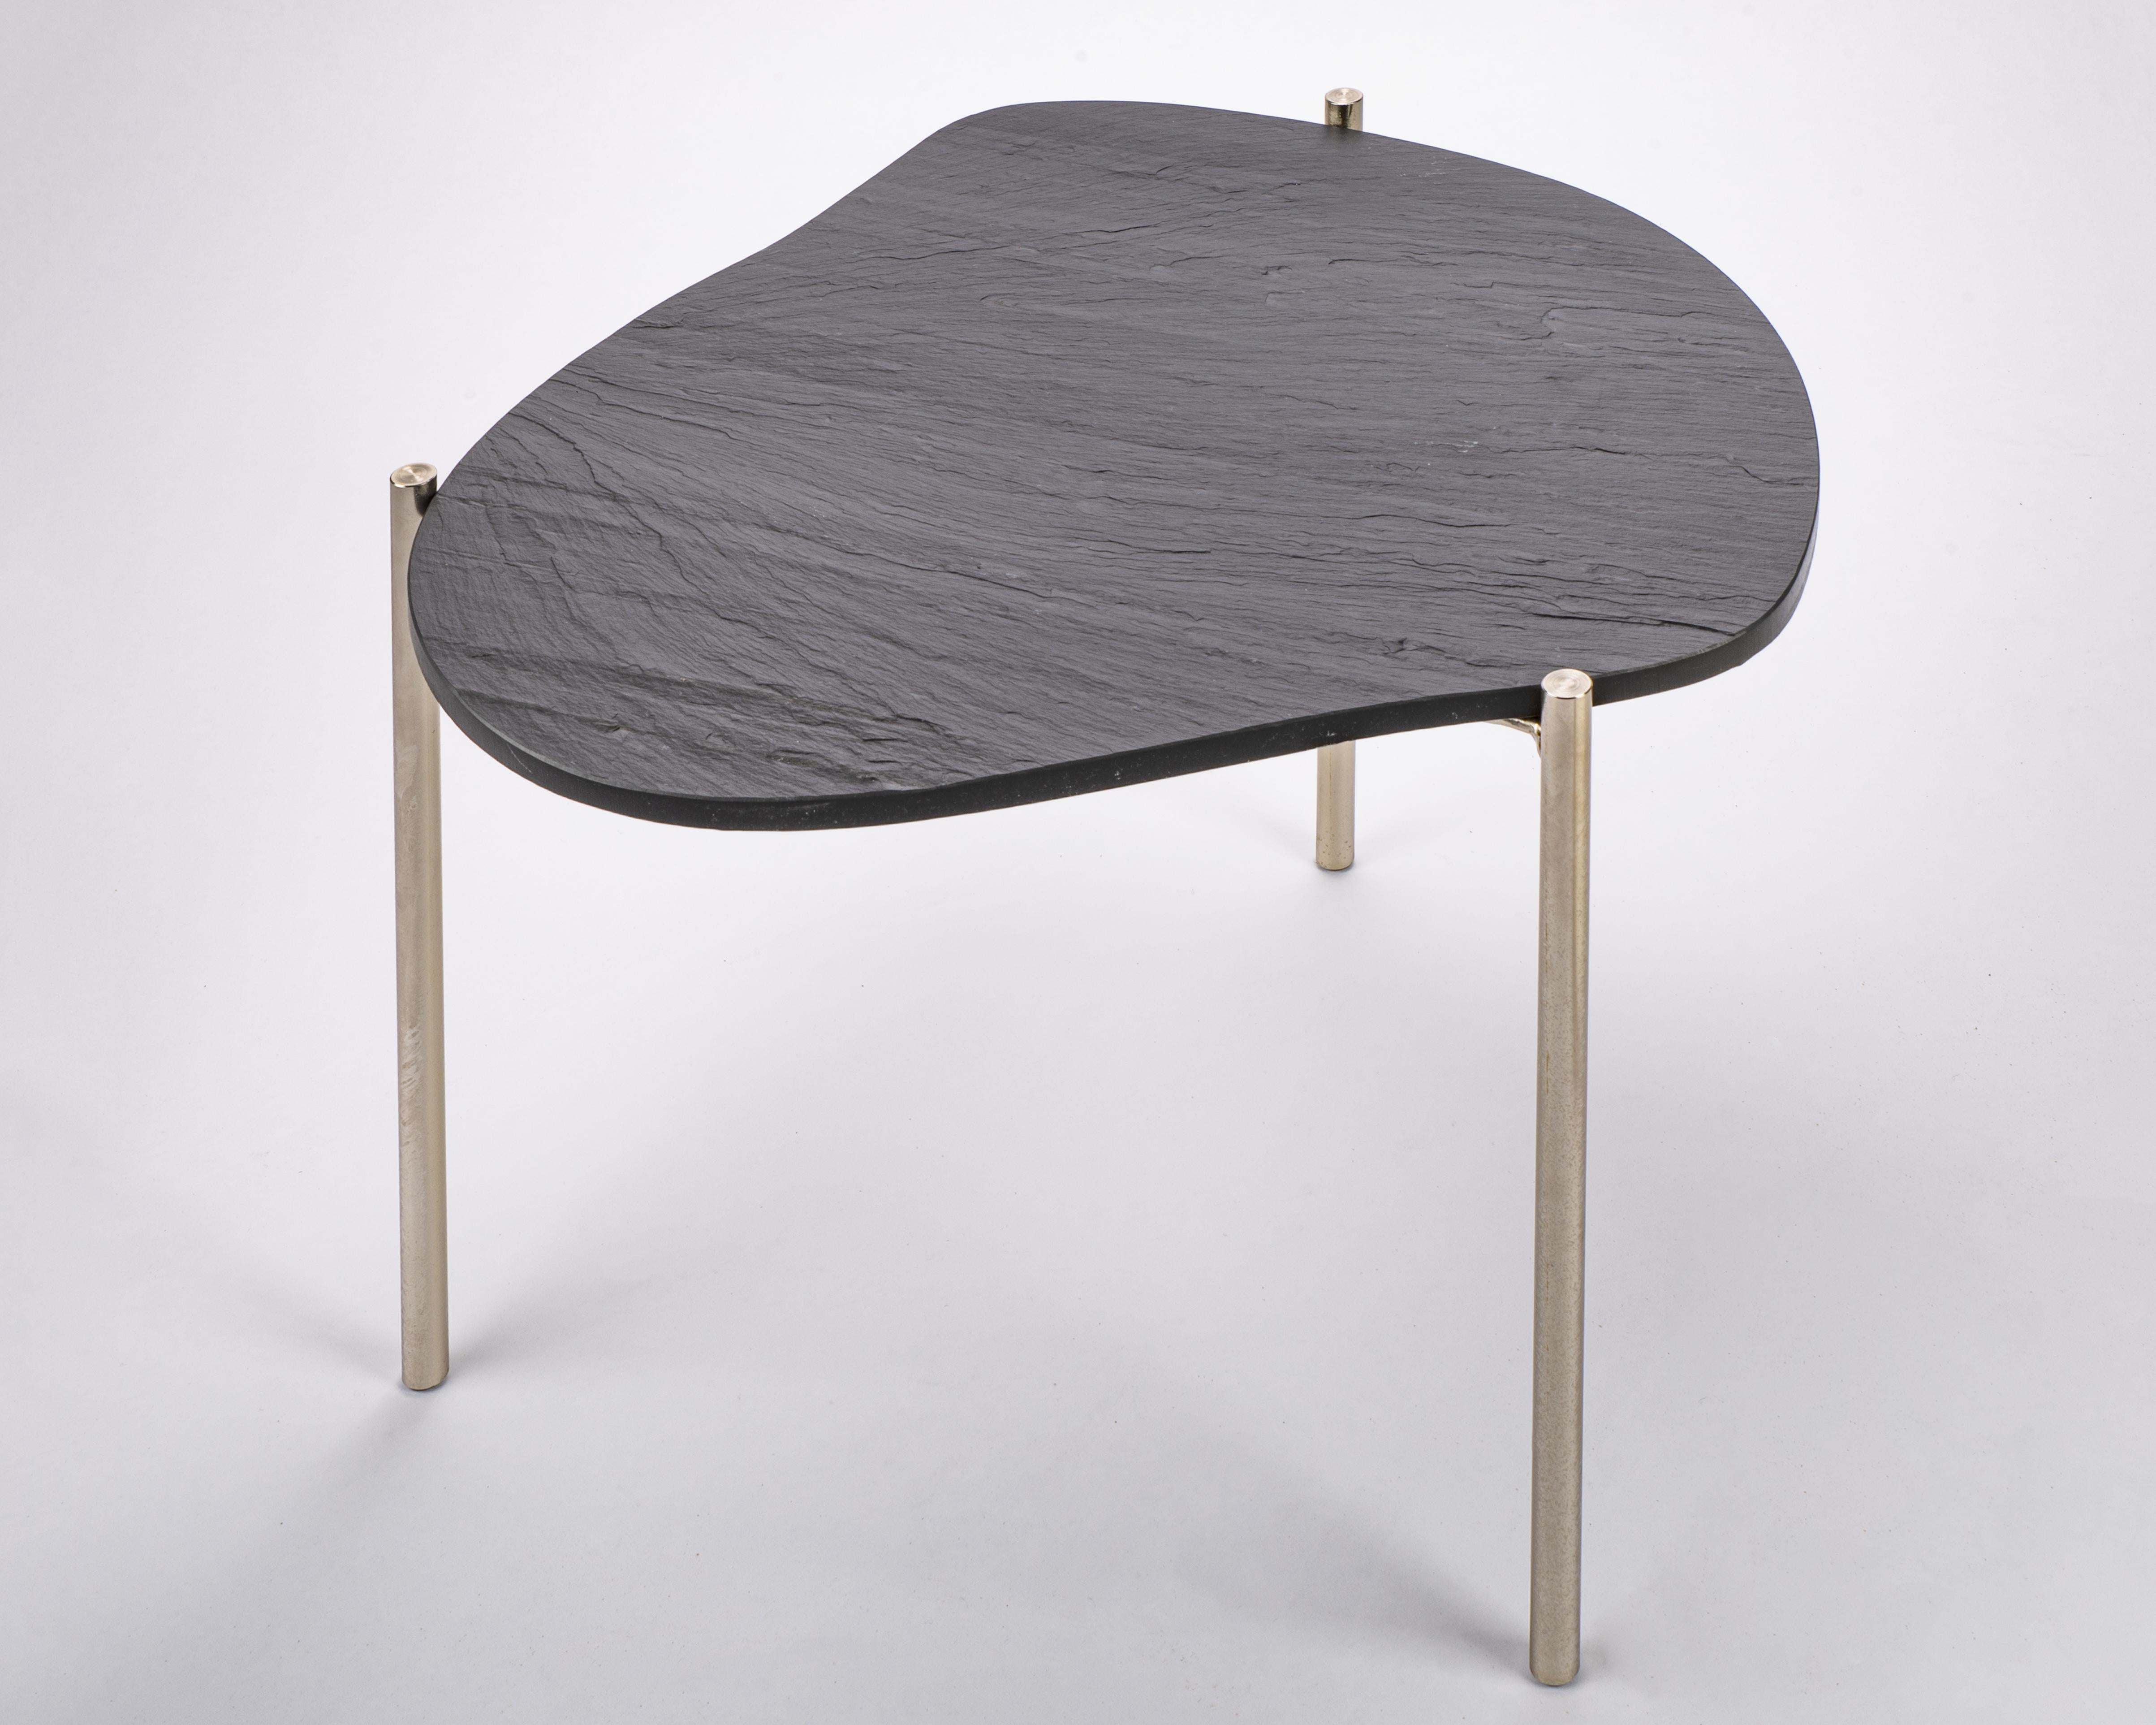 Table no.2 by Anežka Závadová
Materials: Polished slate stone and steel skeleton in satin brass finish
Dimensions: 48.8 x 47.3 x 44.8 cm

Anezka Zavadova has been with Preciosa lighting, since 2016. As a senior designer in the company’s Middle